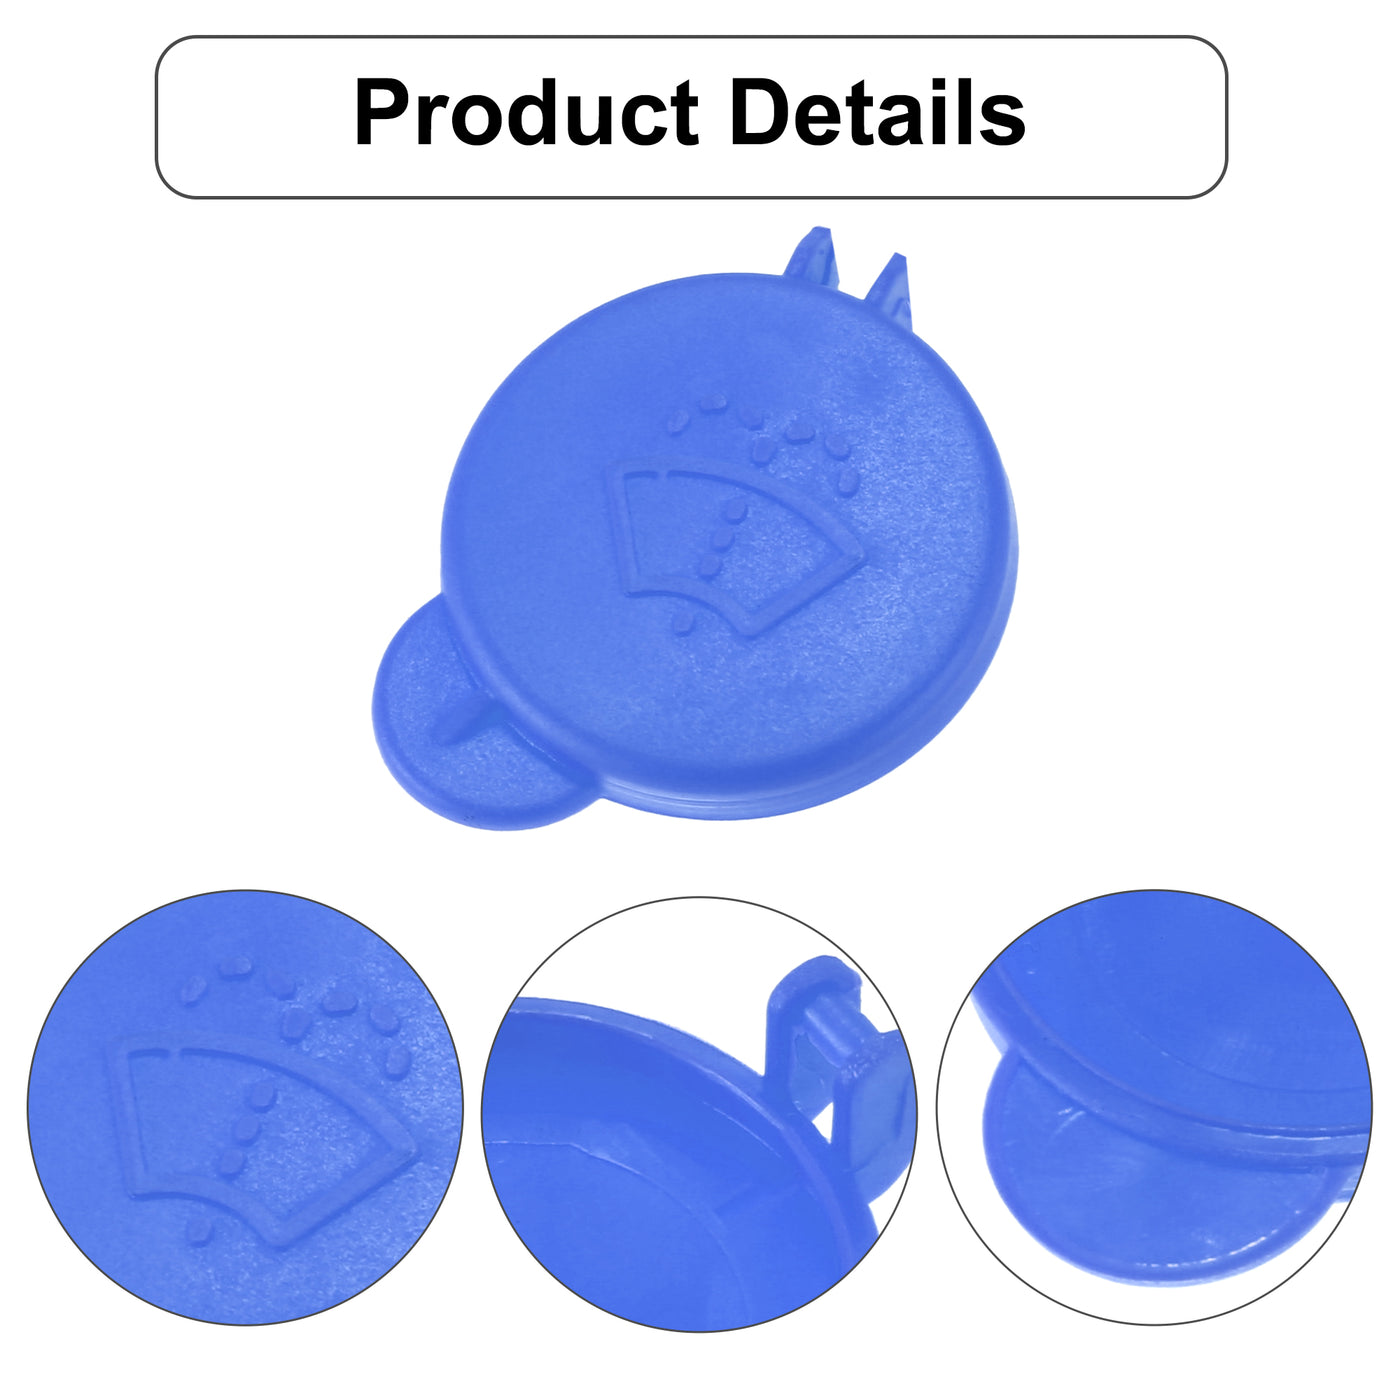 X AUTOHAUX 1488251 Blue Windshield Wiper Washer Fluid Reservoir Tank Bottle Cap Cover for Ford Fusion 2001-2008